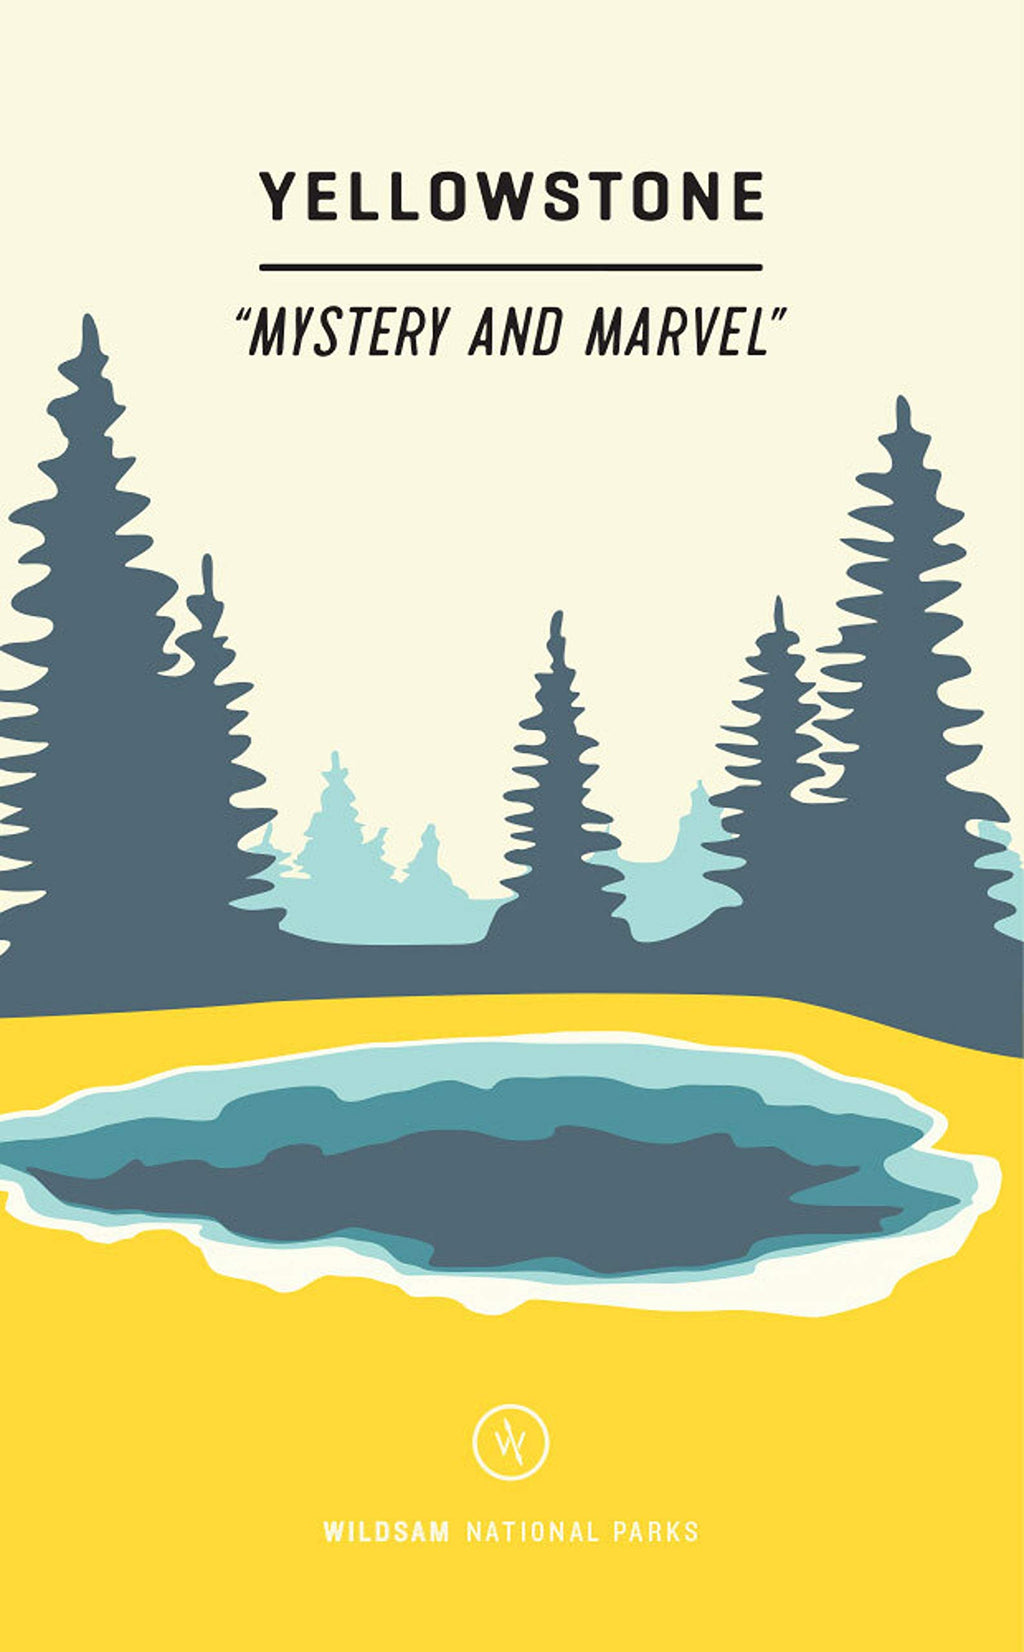 Yellowstone "Mystery And Marvel" Field Guide